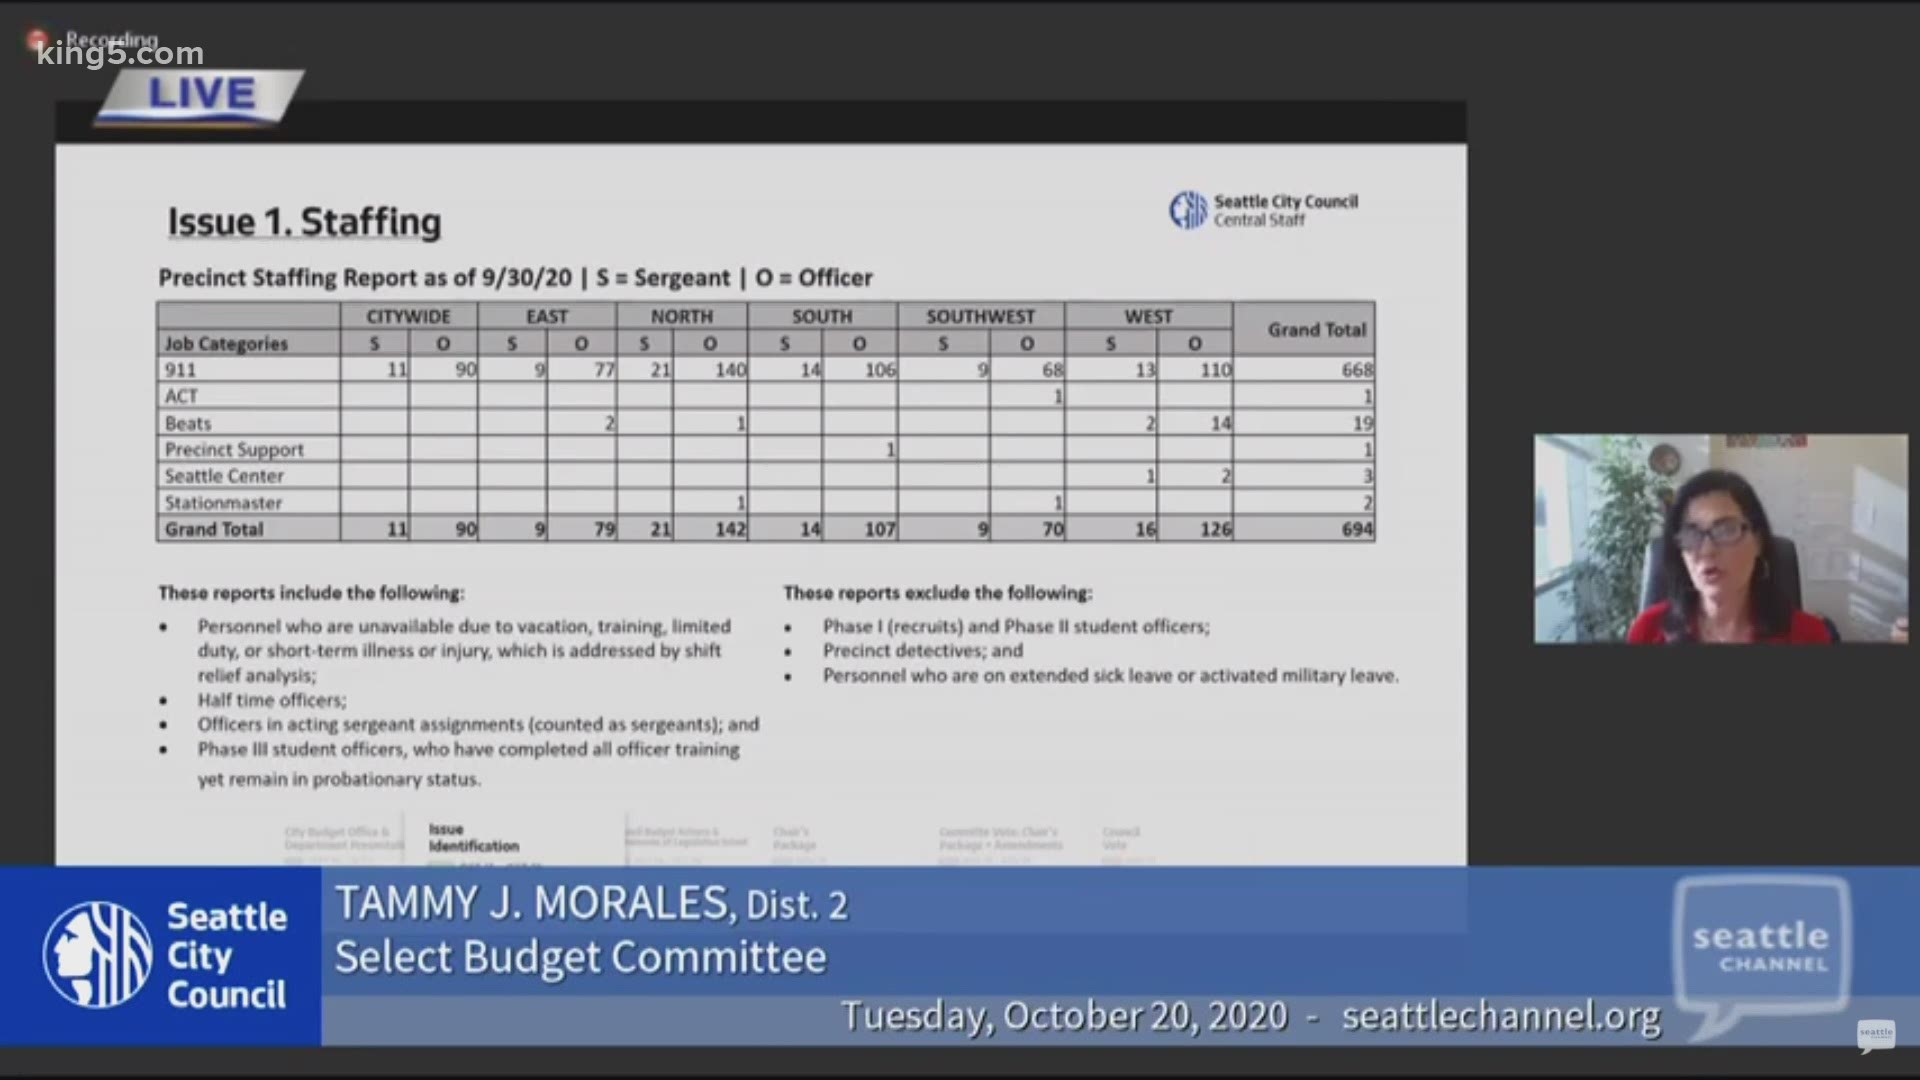 The Select Budget Committee is looking into proposed budget cuts of more than $49 million from the Seattle Police Department.